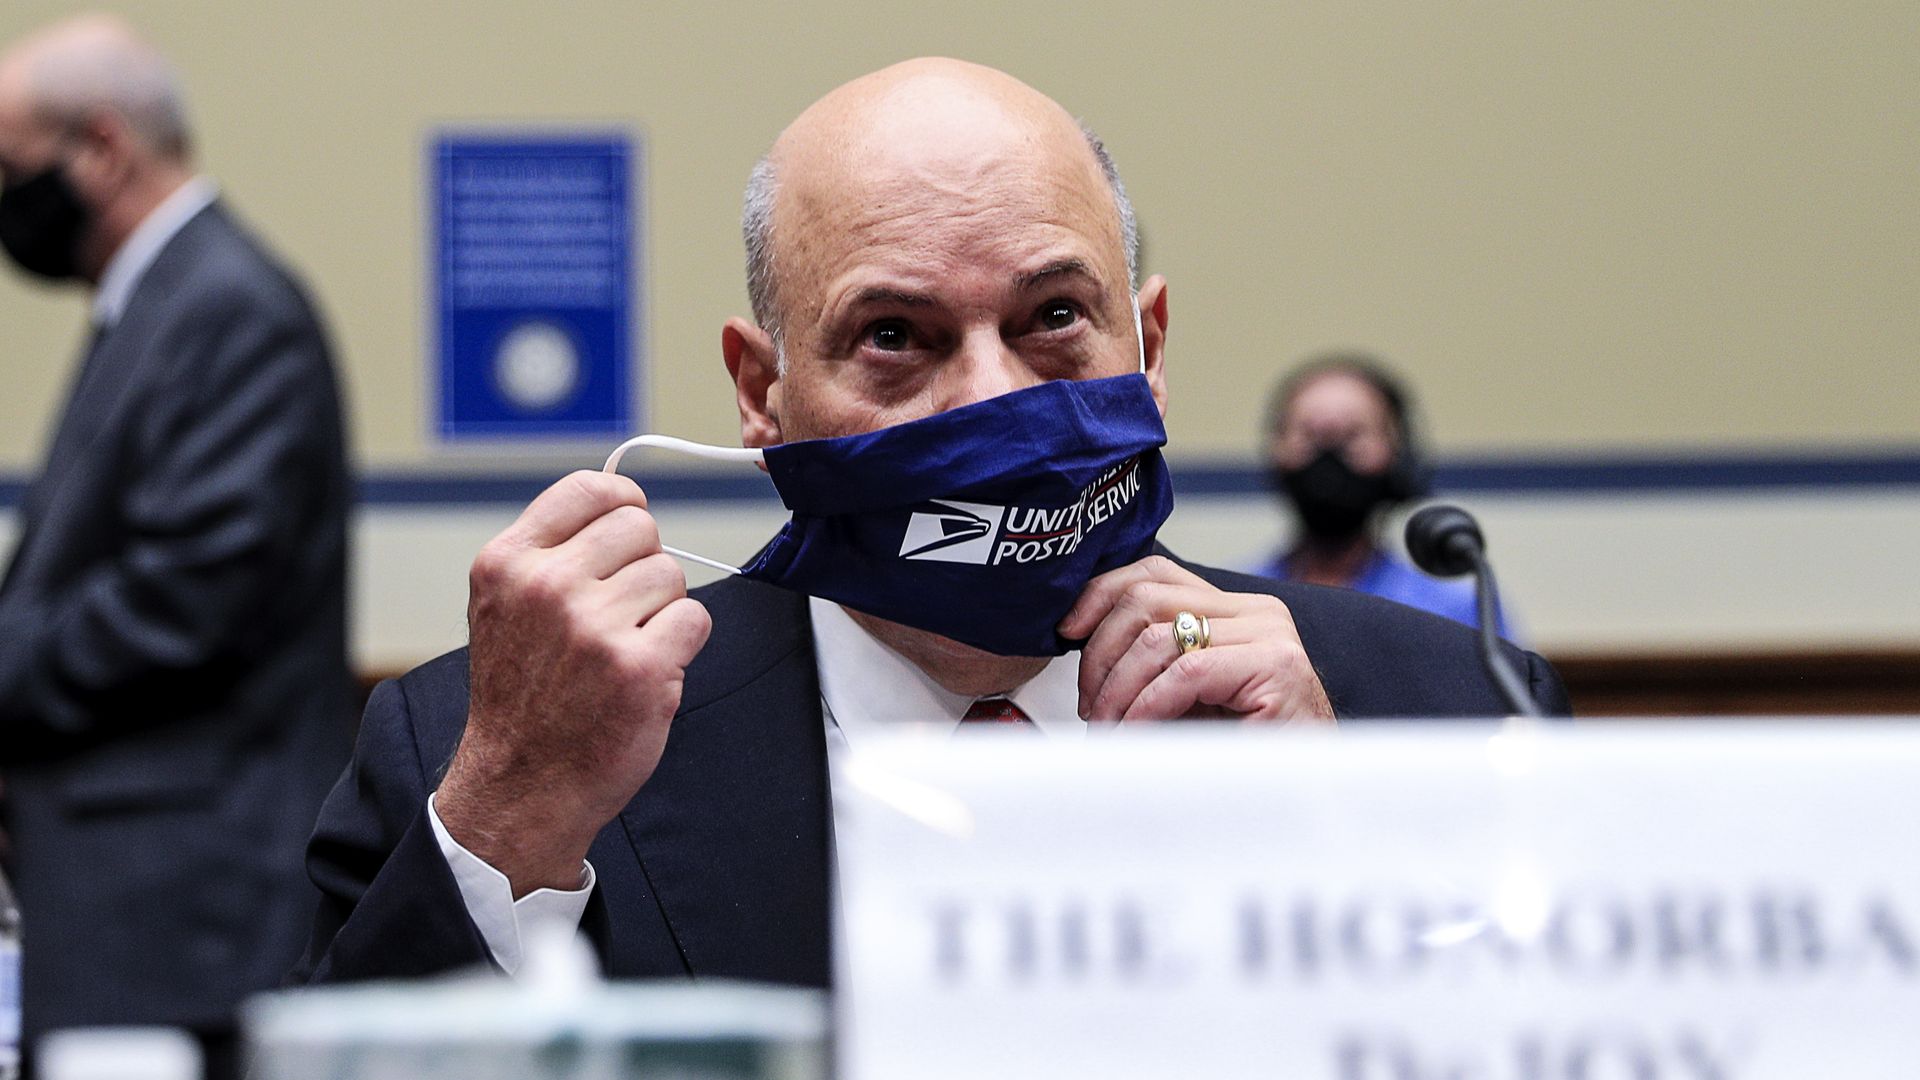 Postmaster General Louis DeJoy adjusts his face mask during a congressional hearing